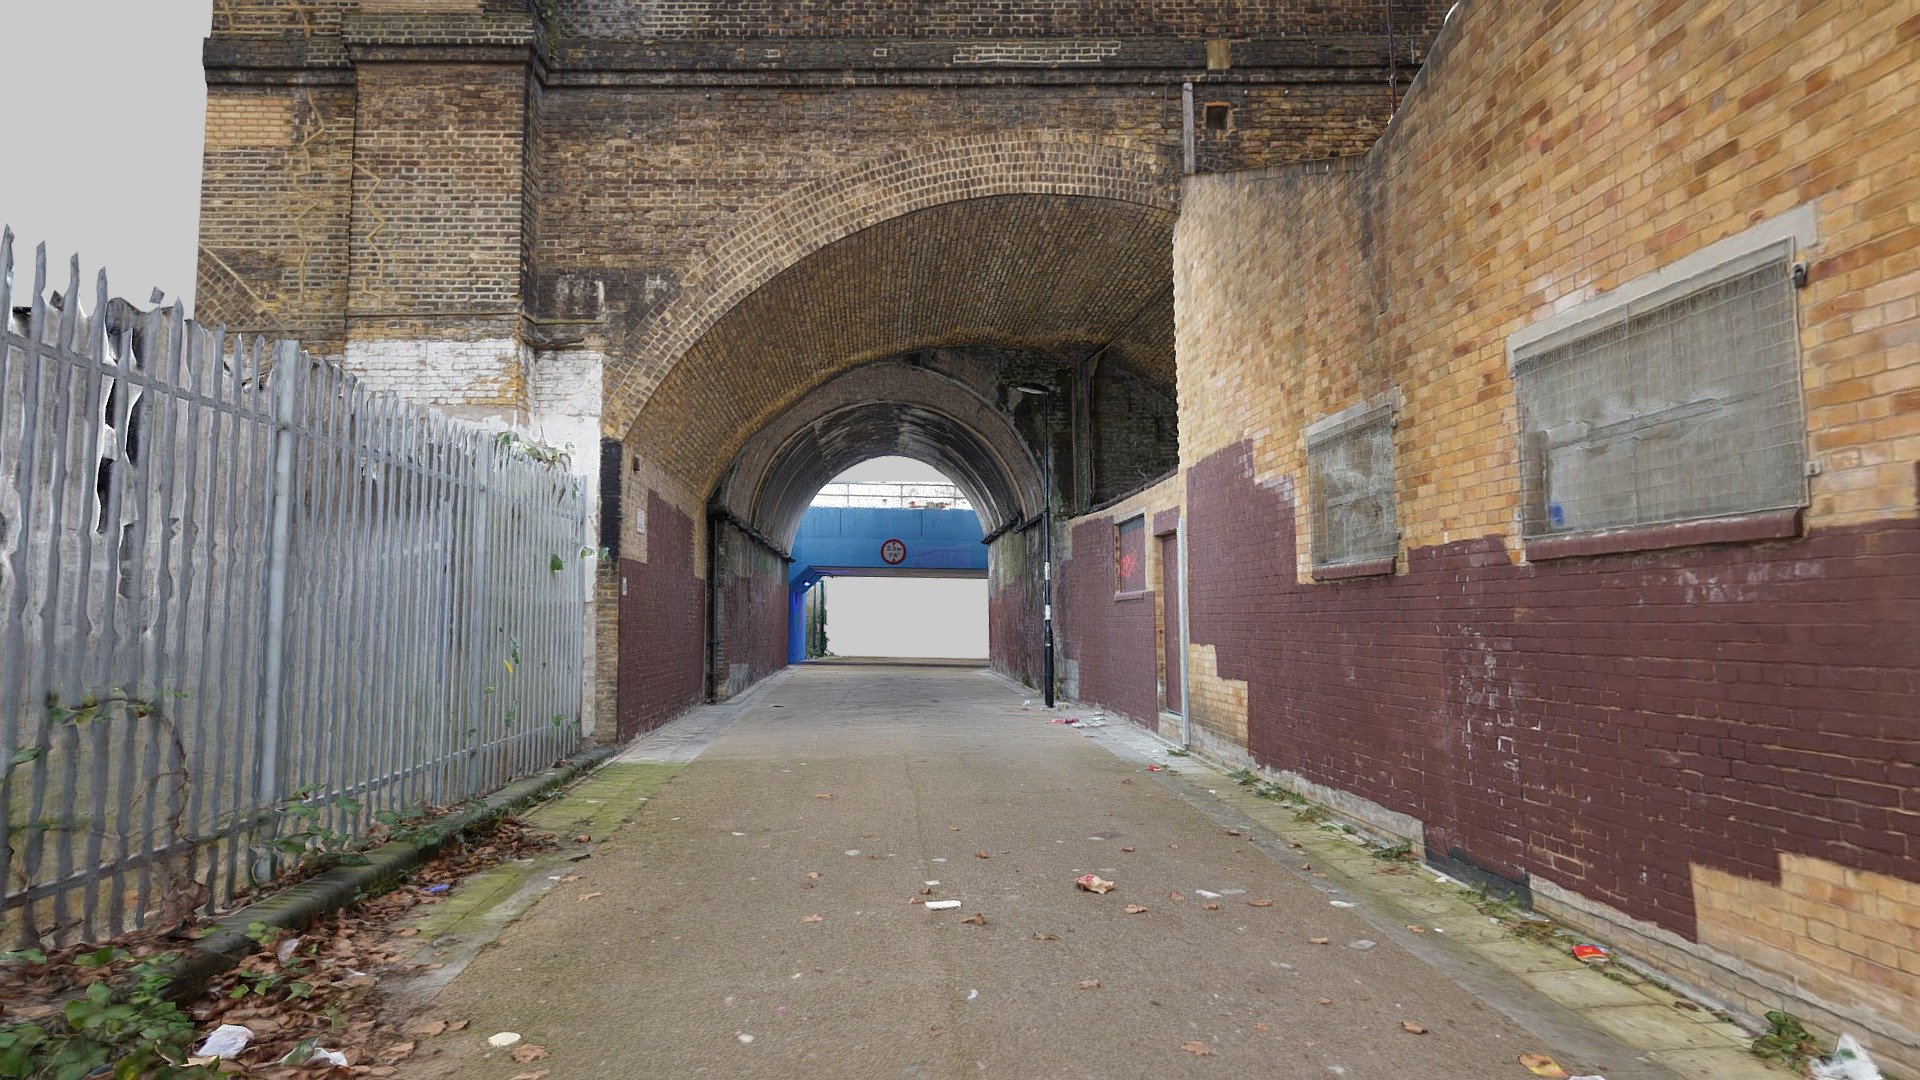 The northern railway arches (and a bonus bridge) over Bolina Road, Millwall, London.

947 photos taken in February 2022 with a Sony a7R III and processed in Reality Capture 3d model